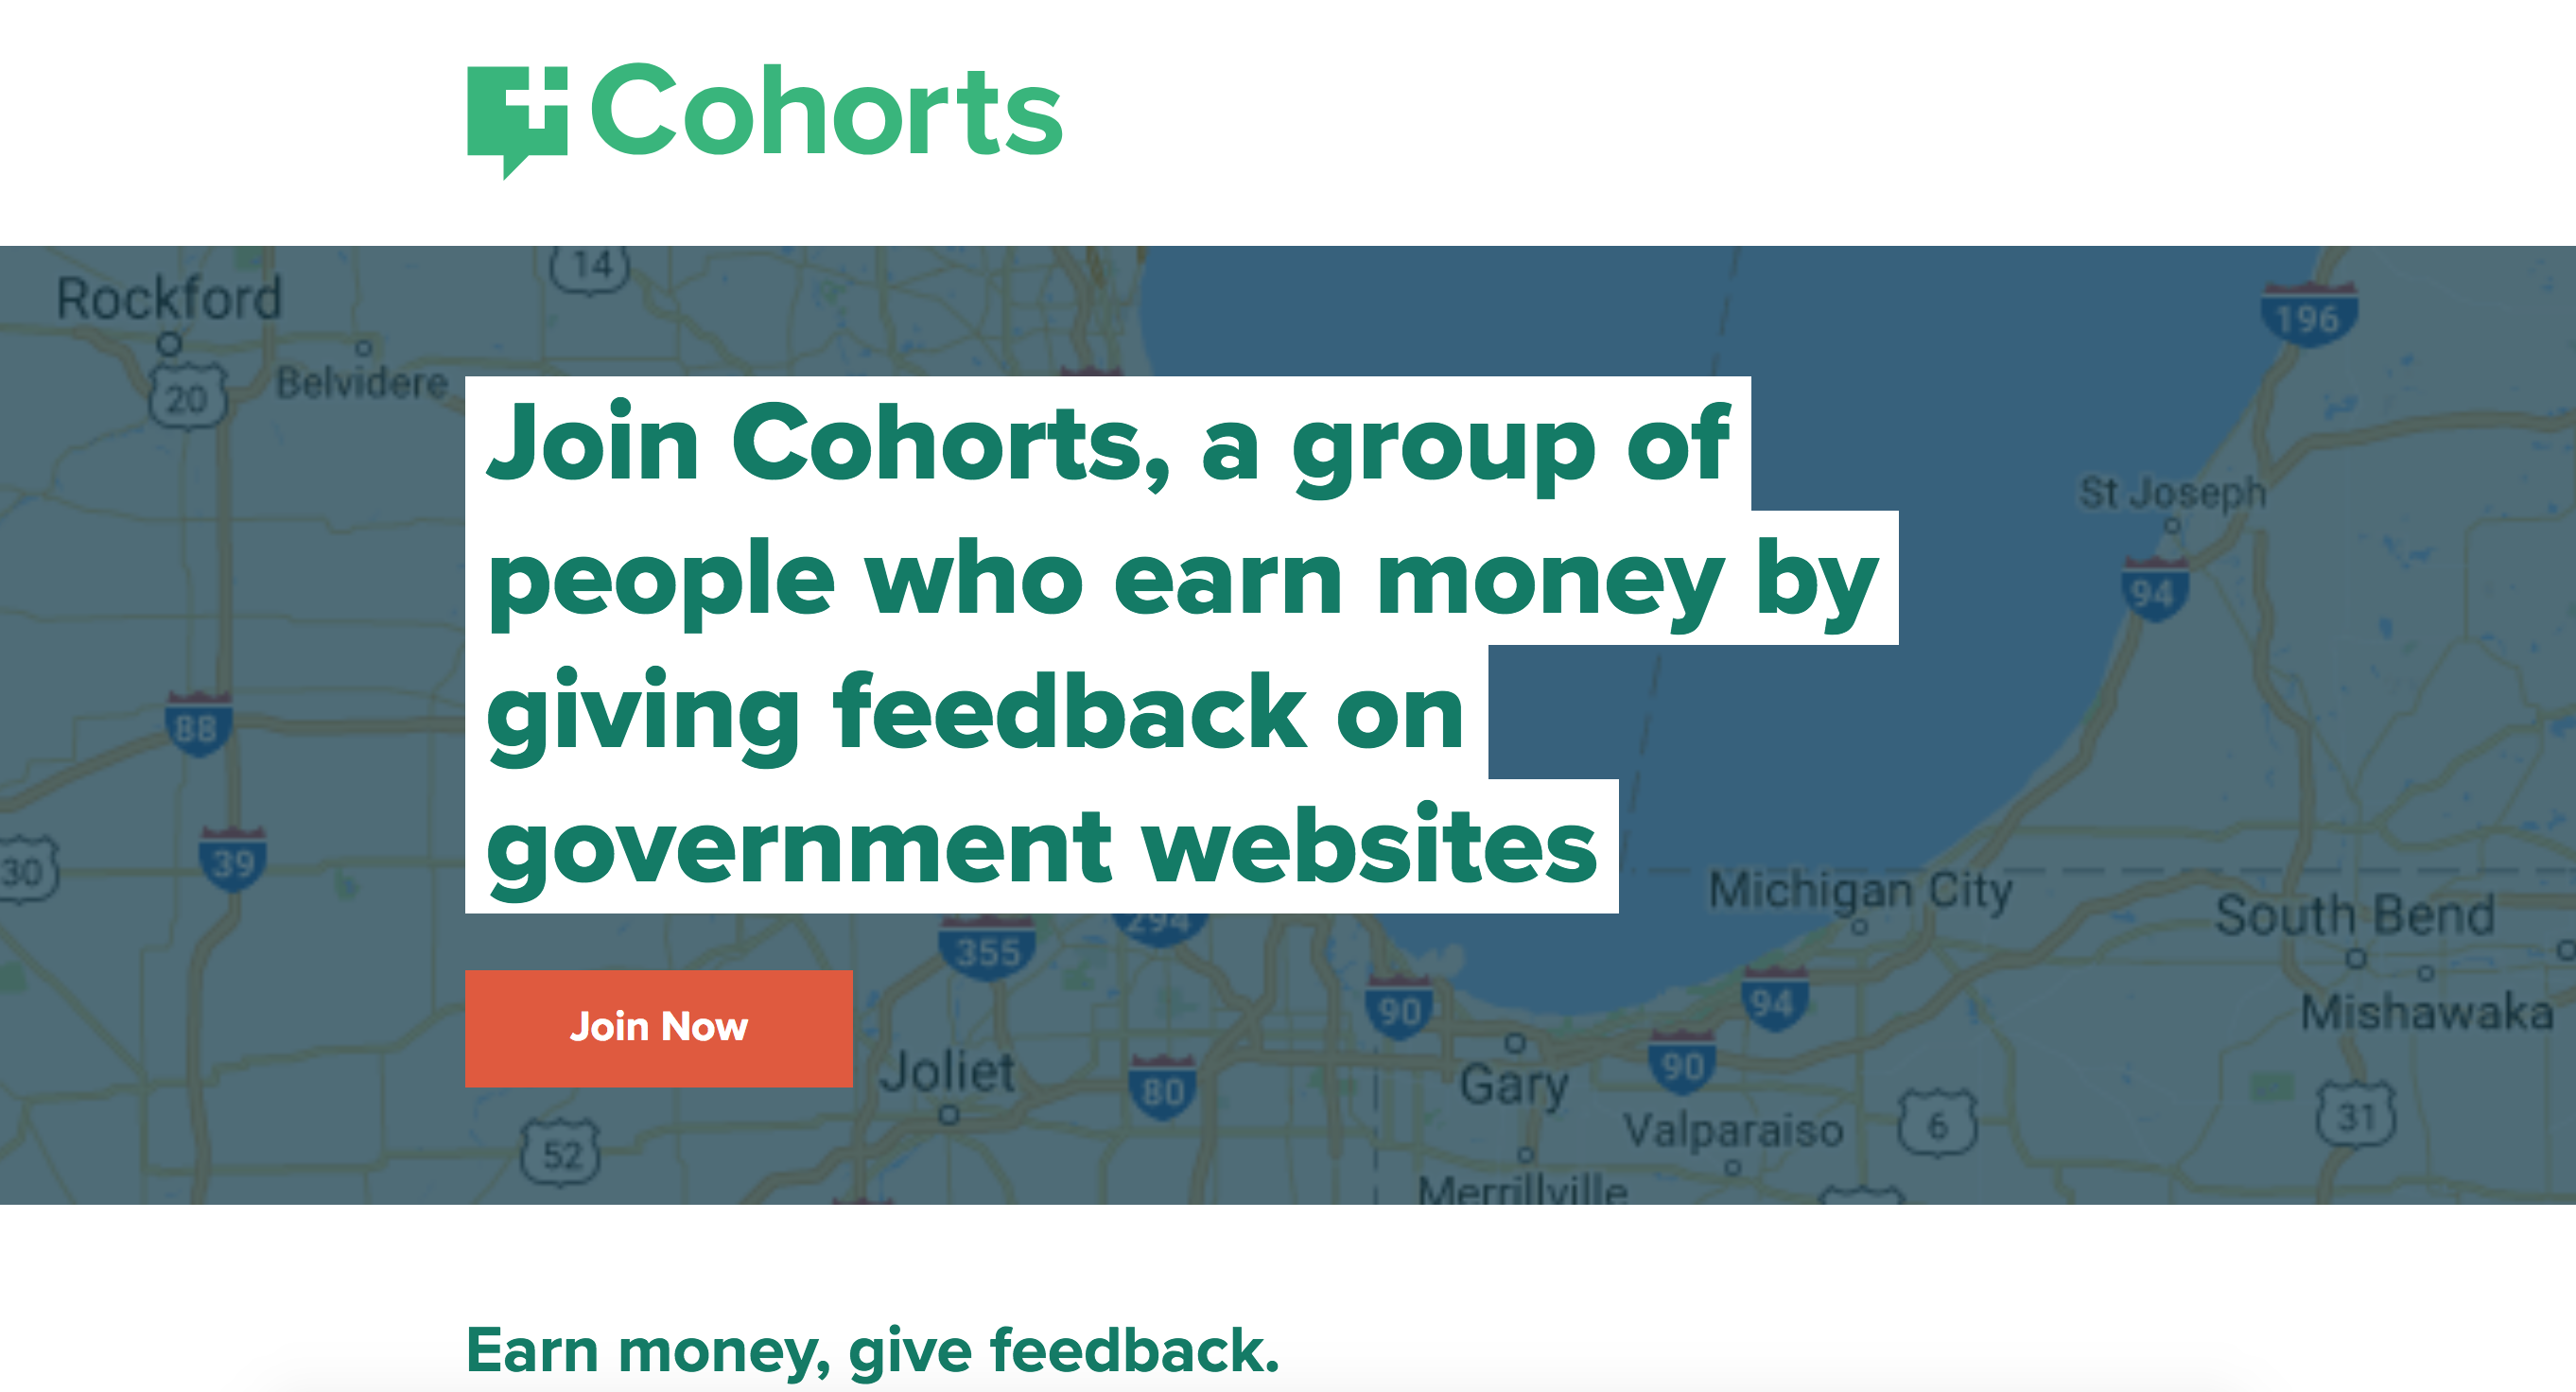 Cohorts: a group of people who make money by givign feedback on government websiites